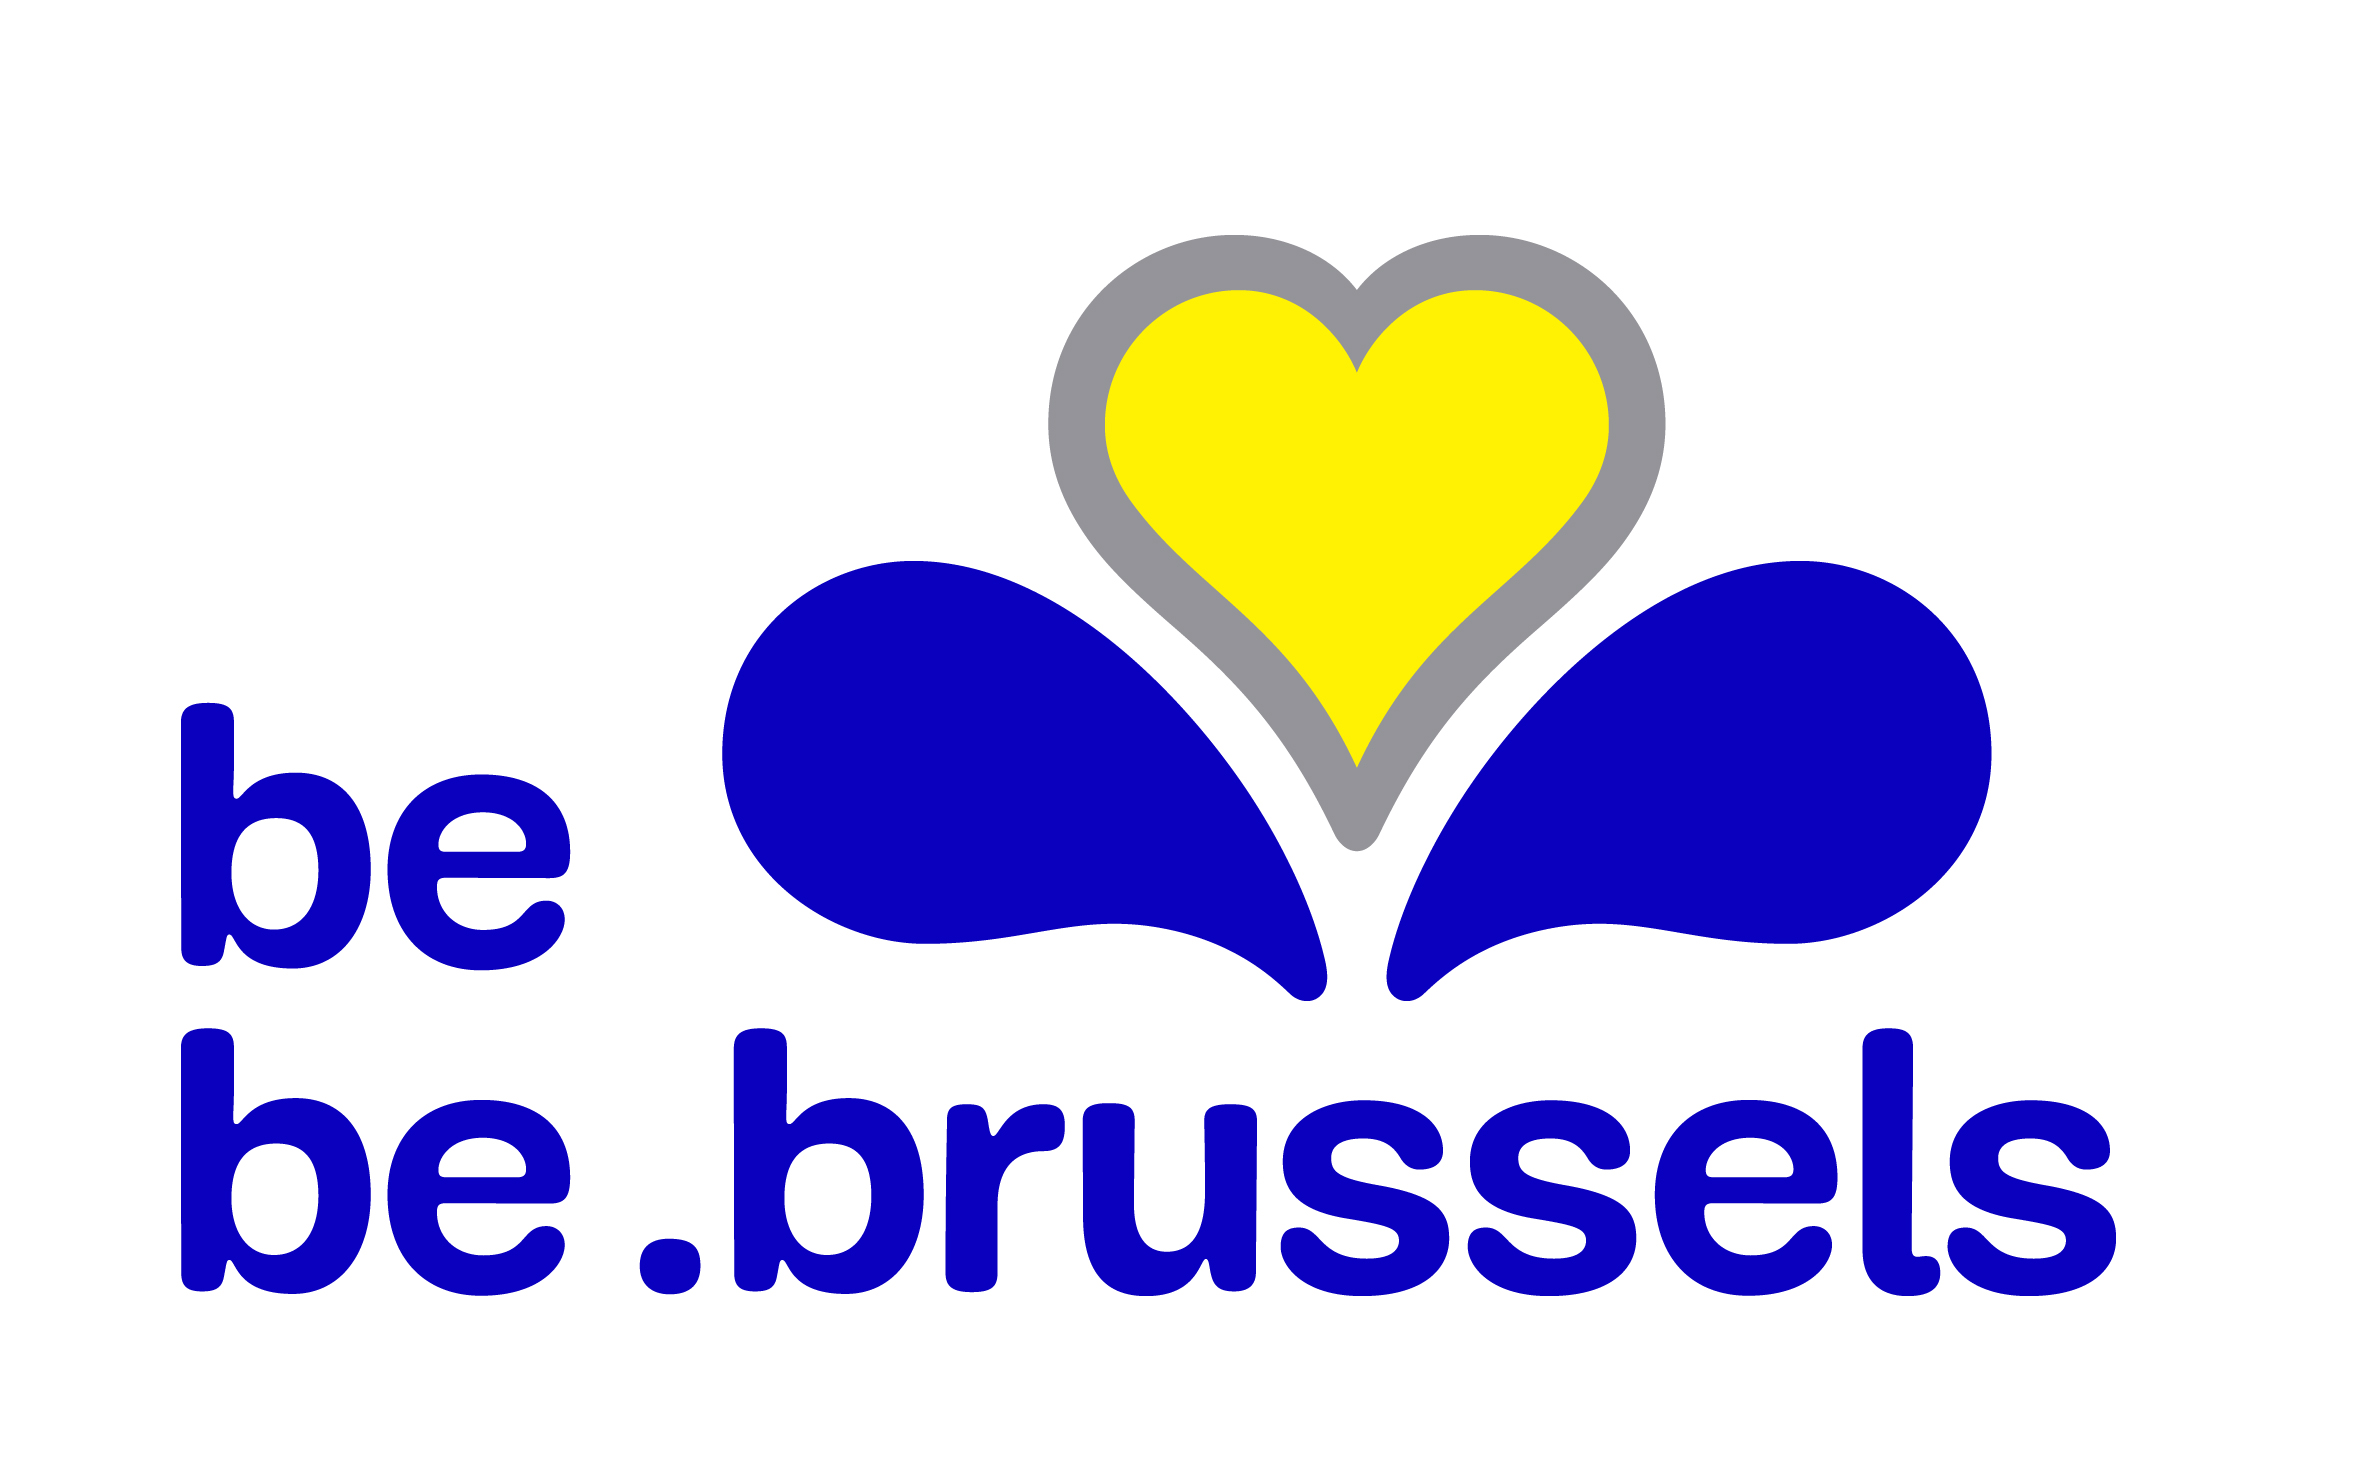 ”BE.BRUSSELS”